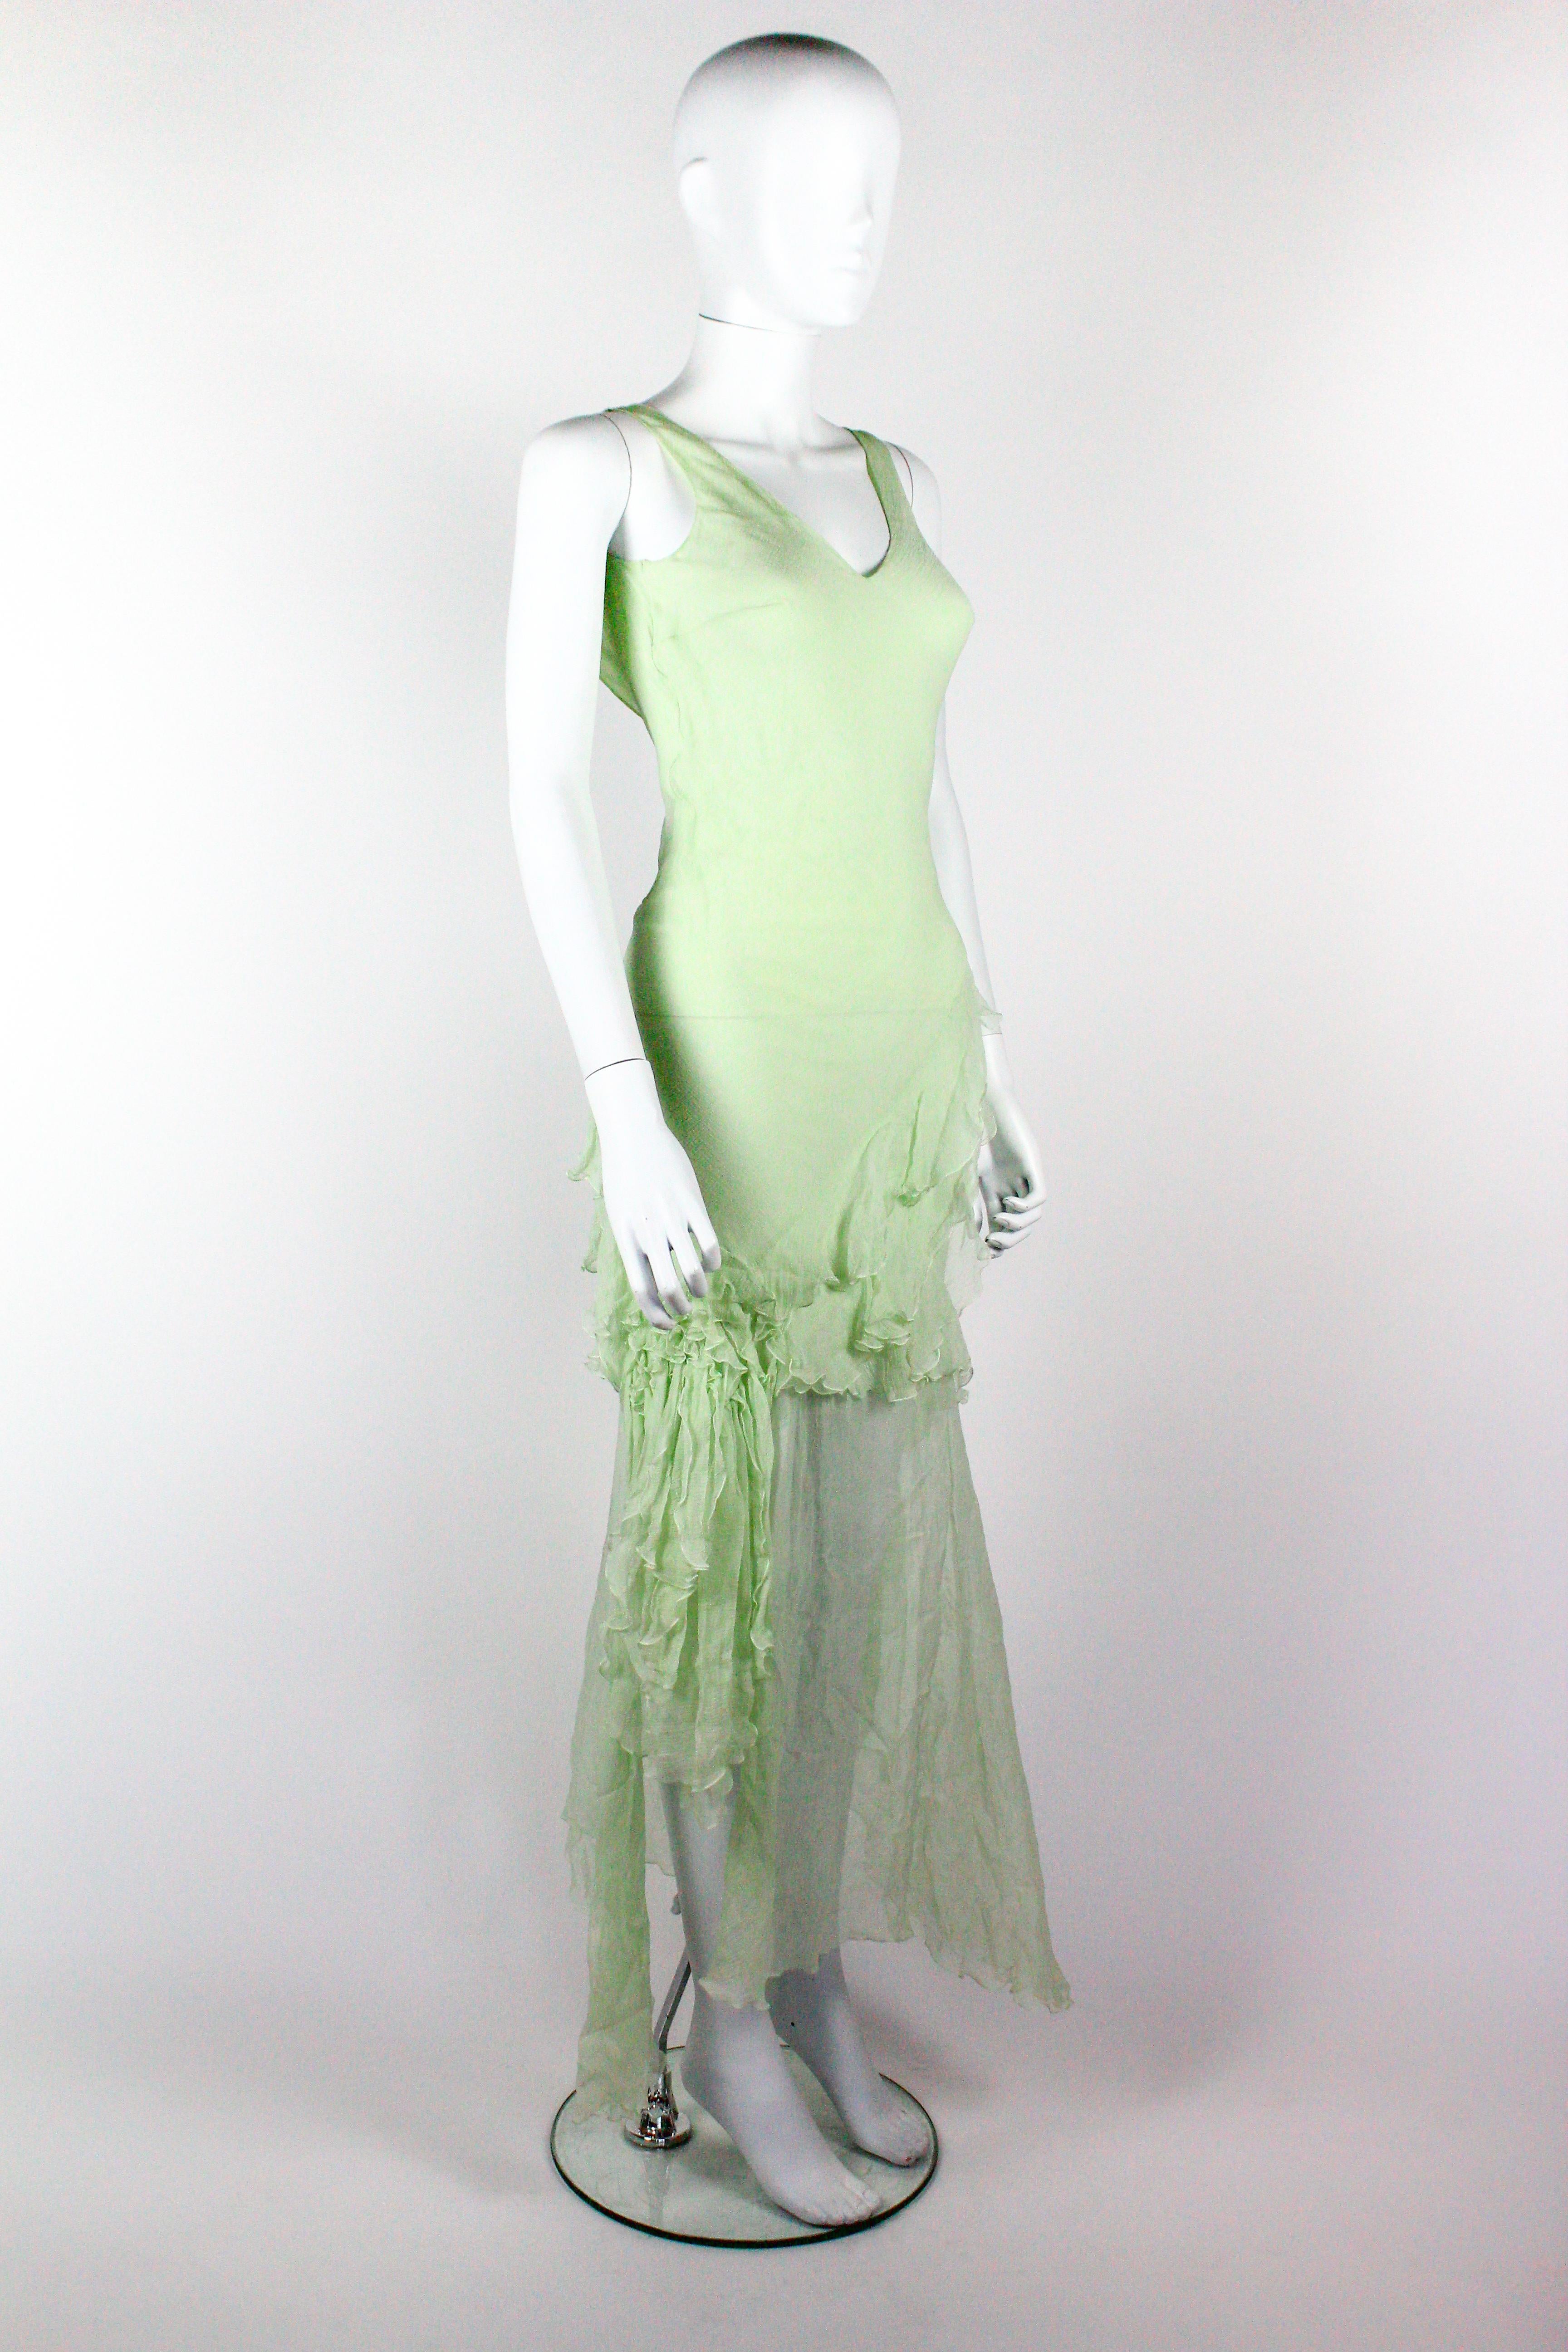 John Galliano silk dress in mint green, from the Fall/Winter 1995 'Delores' collection, a tribute to the Mexican actress Dolores del Rio. As seen on the runway. The dress features beautifully constructed ruffles of silk chiffon and a draped chain on